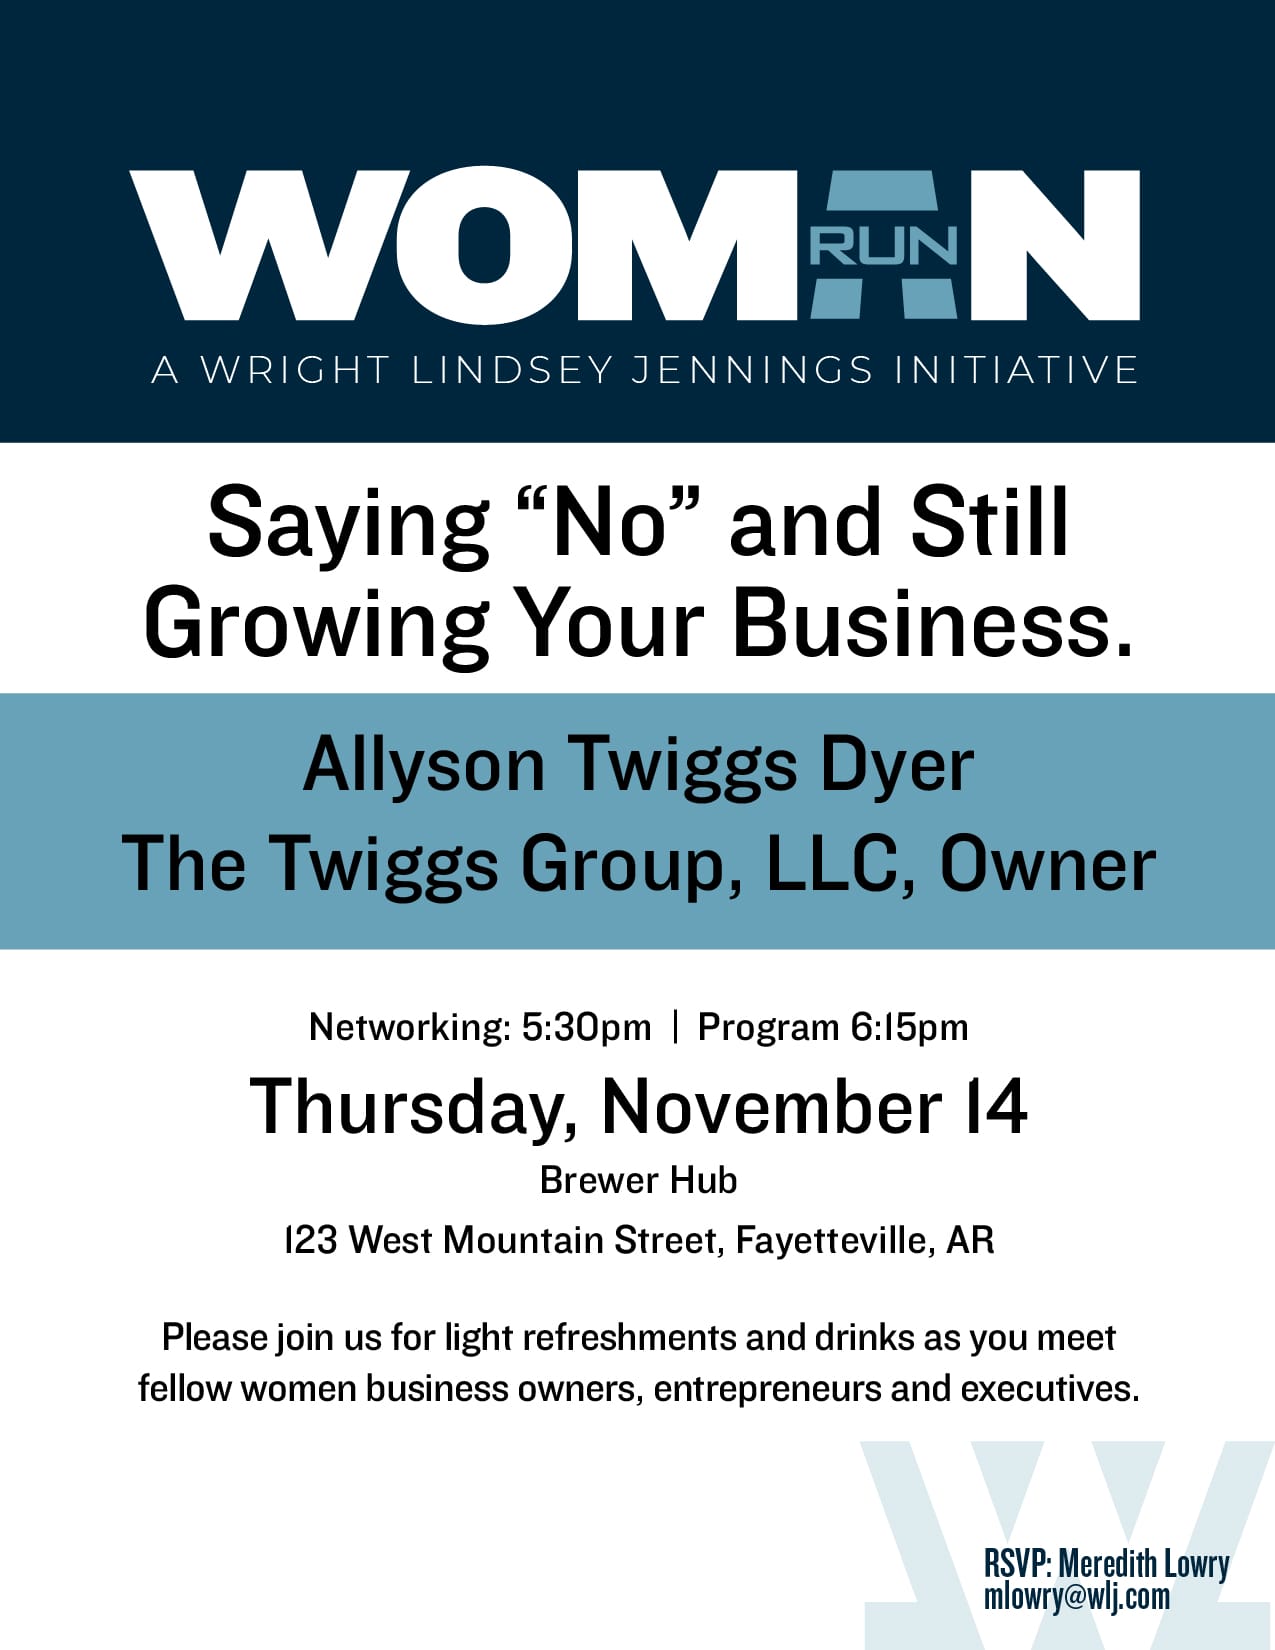 woman run - growing your business event